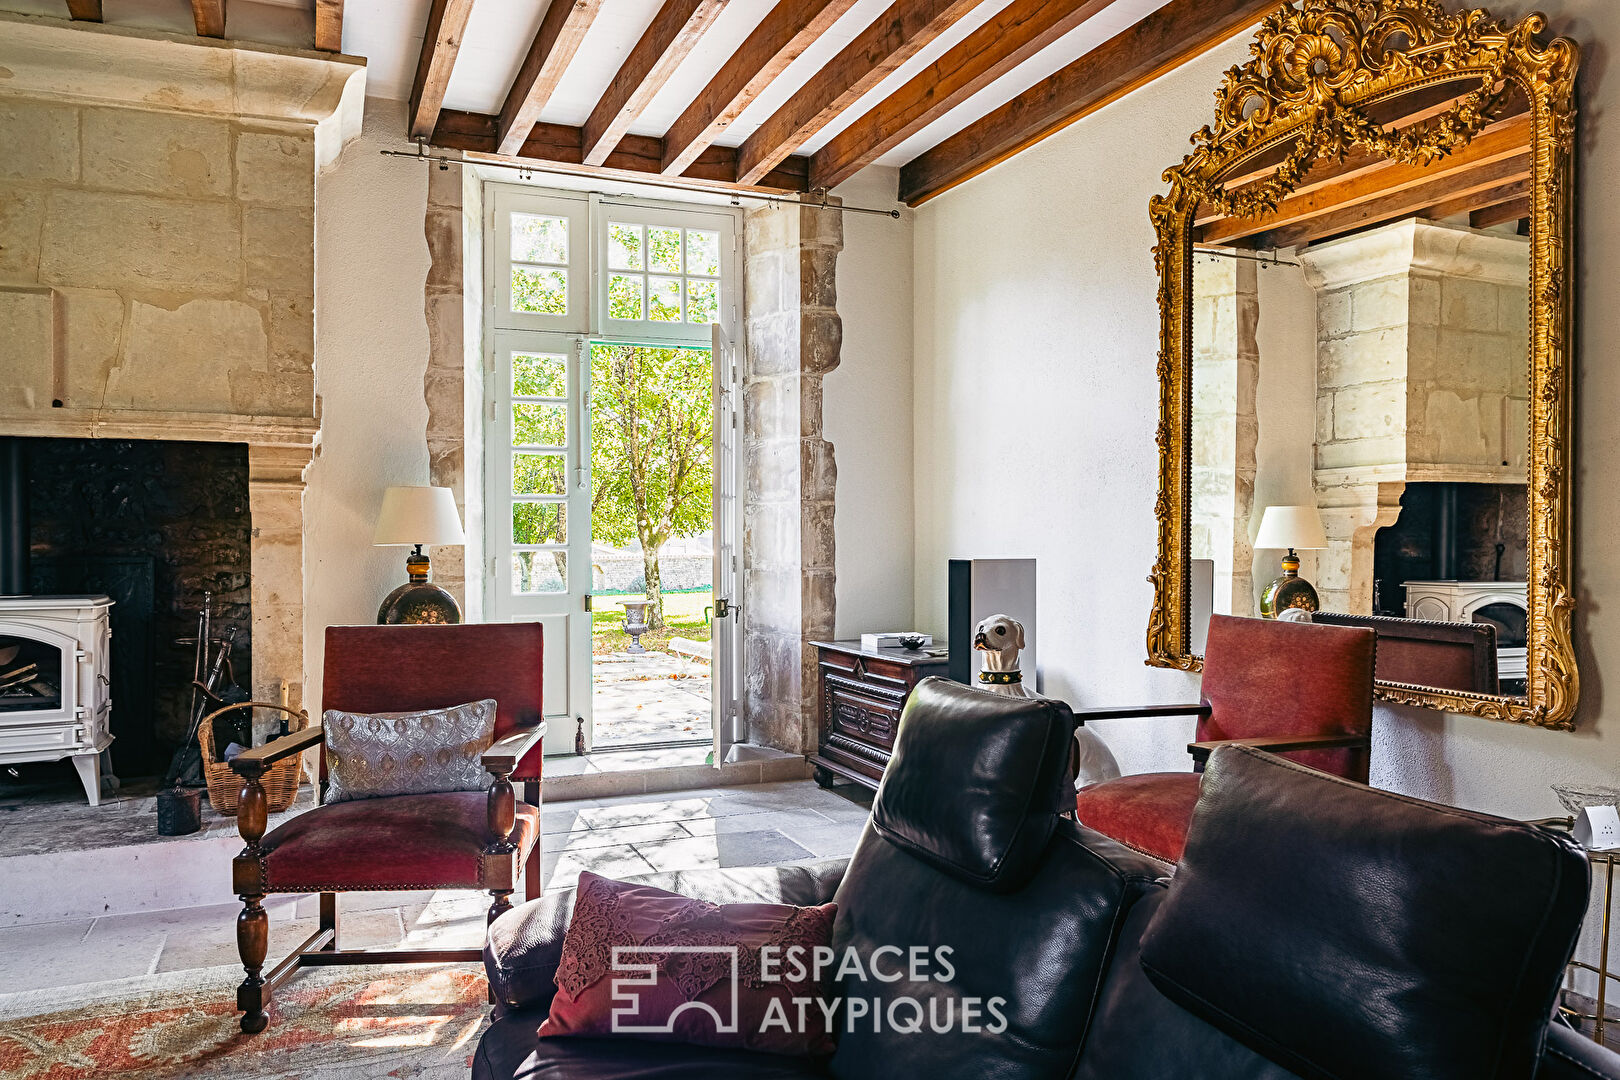 Magnificent 16th century home in a bucolic setting on the banks of the Sèvre